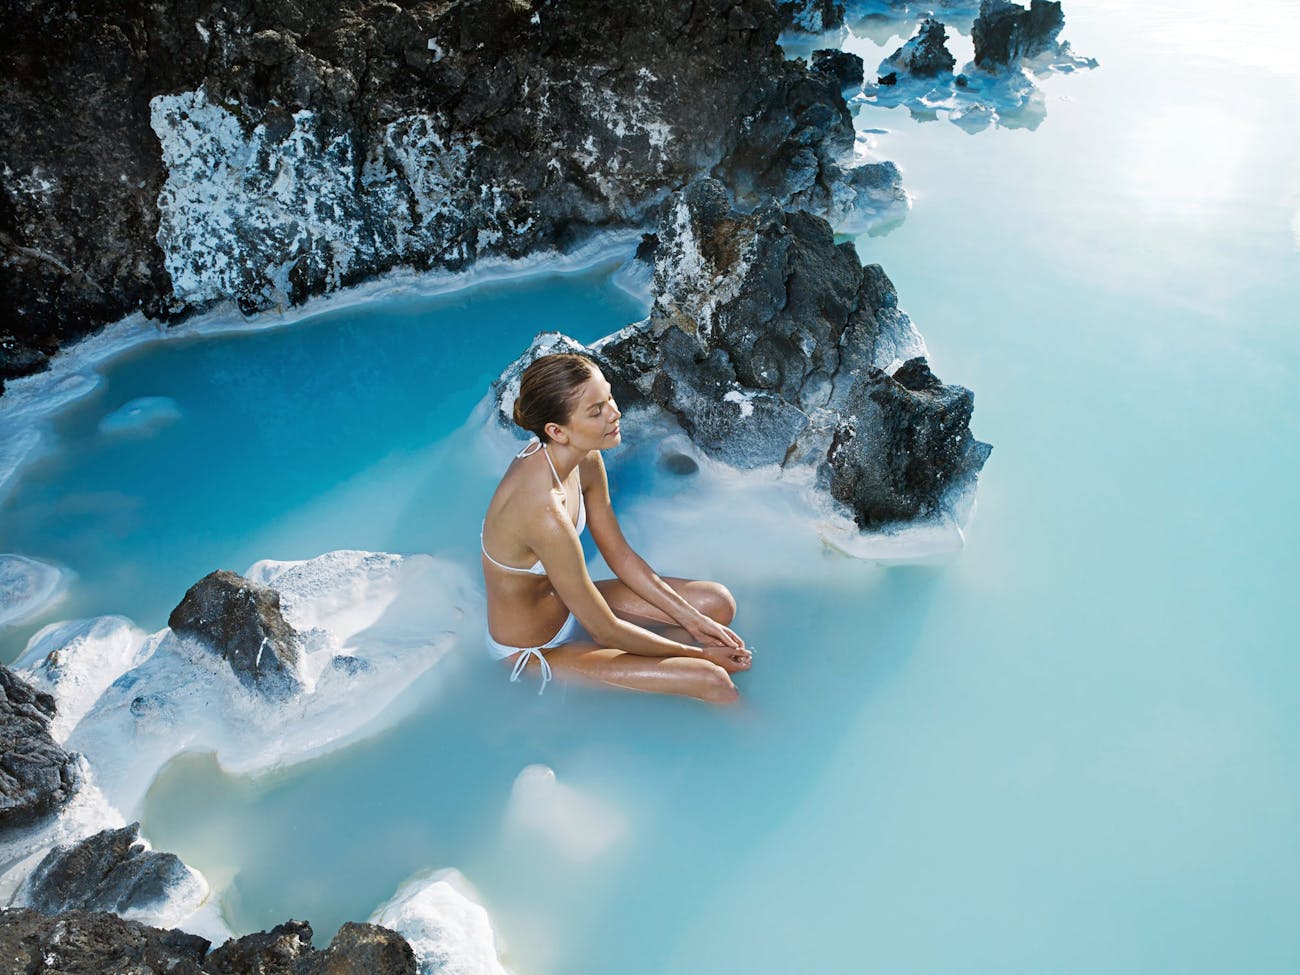 Island Girls Nude Nature Beach - When You Have to Get Naked in Iceland | Guide to Iceland